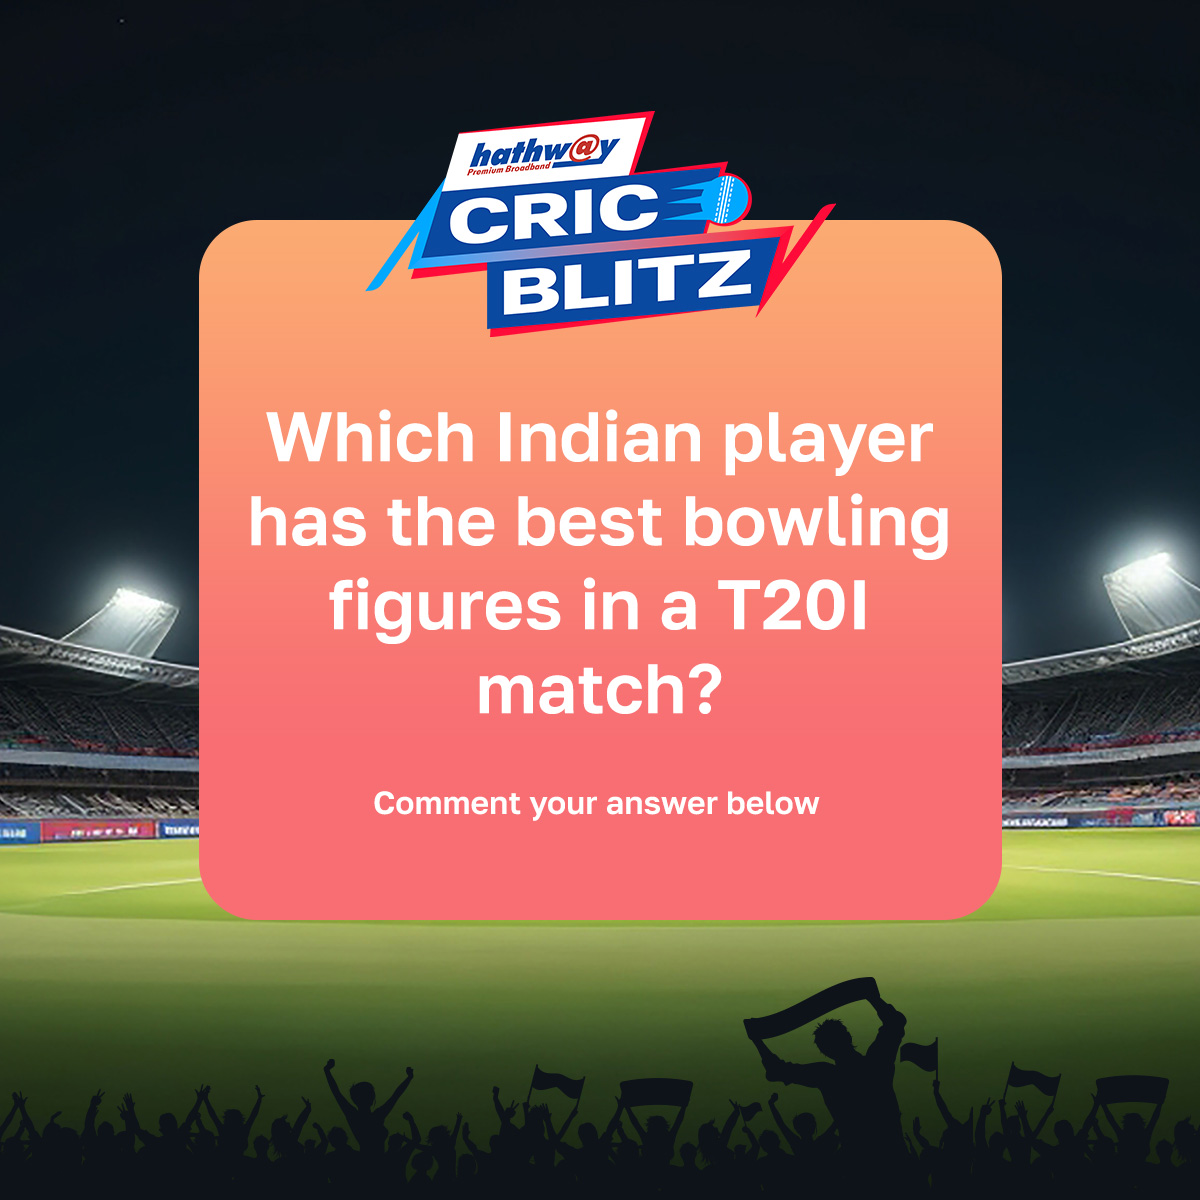 Guess which Indian player has the best bowling figures in a T20I match? Watch out for the Hathway CricBlitz contest post coming out every Thursdays and Fridays. Participate and get both right answers to win Amazing gift vouchers. Participate today! #Contest #ContestAlert